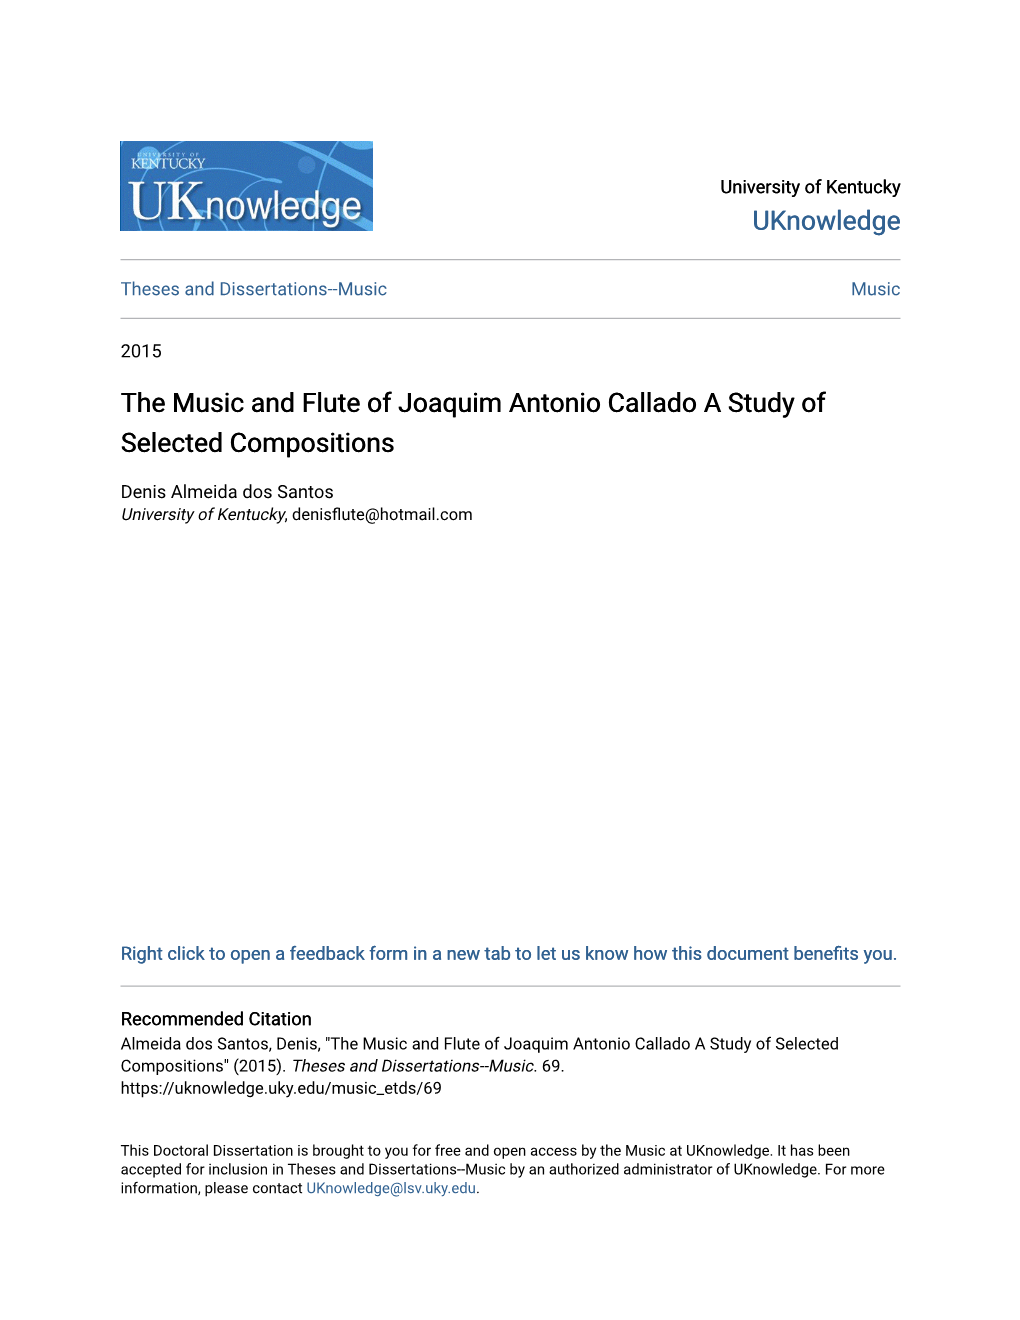 The Music and Flute of Joaquim Antonio Callado a Study of Selected Compositions